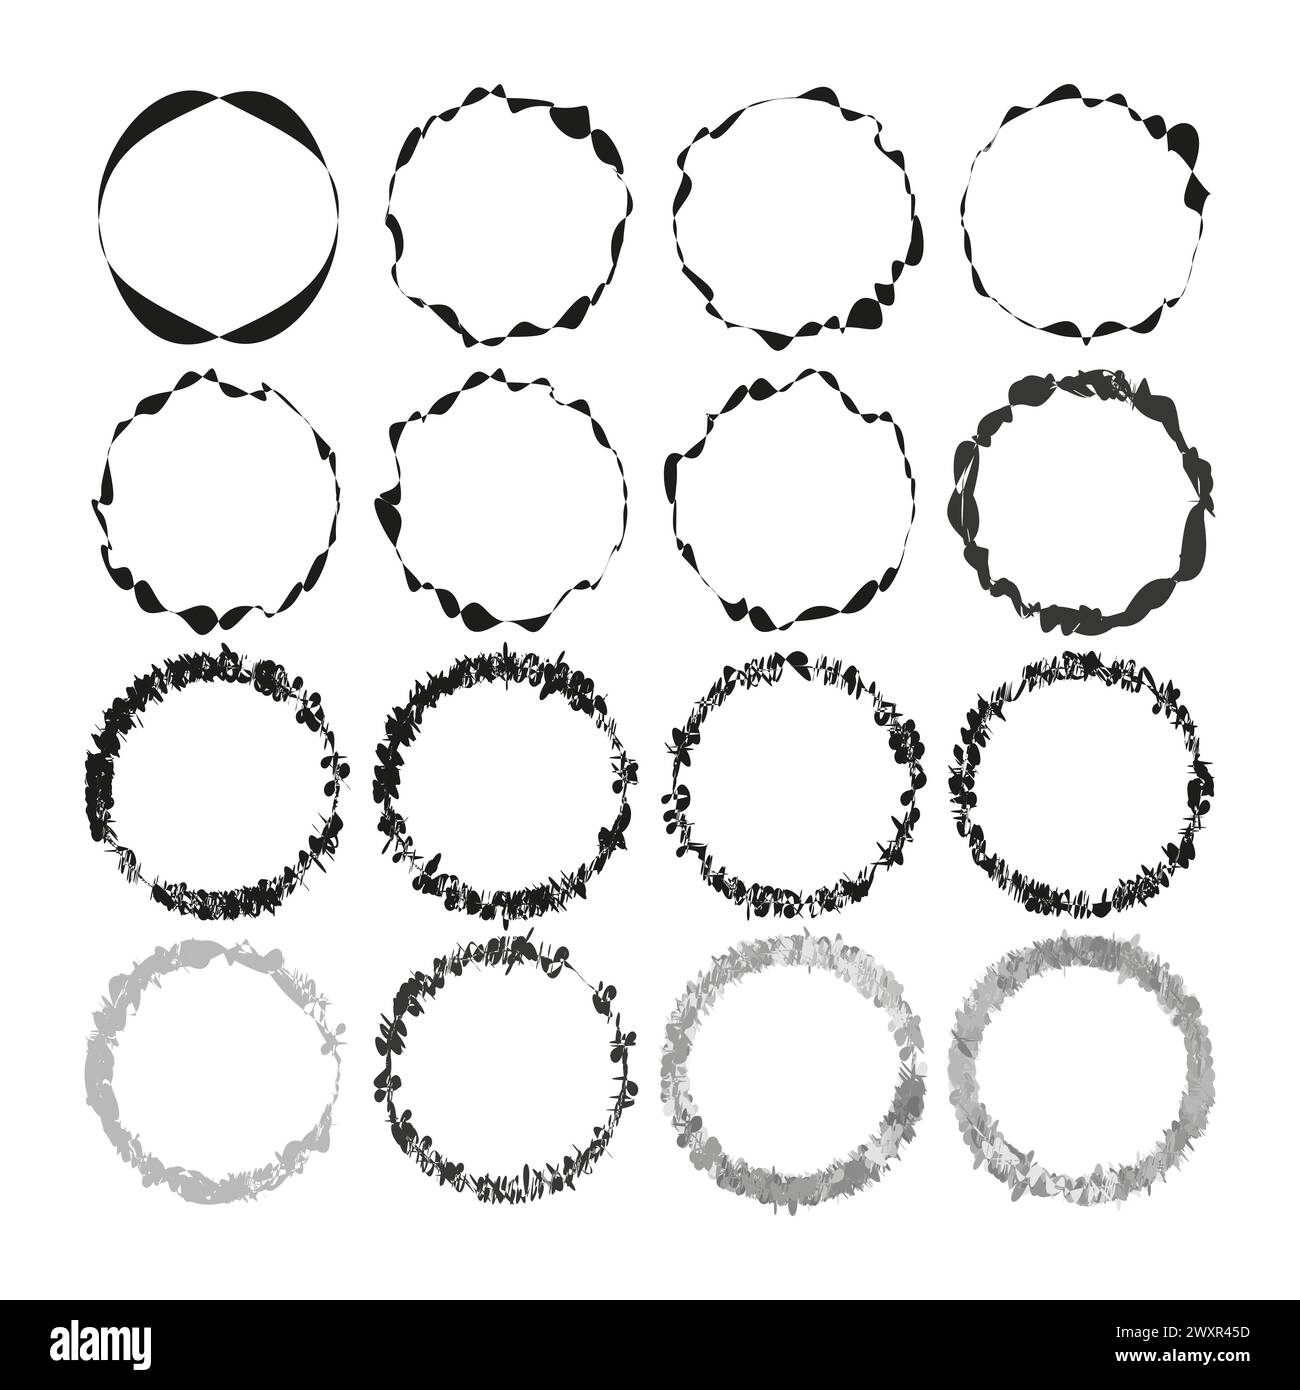 Assorted circular frames set. Varied round borders collection. Circle edge patterns. Decorative ring designs. Vector illustration. EPS 10. Stock Vector